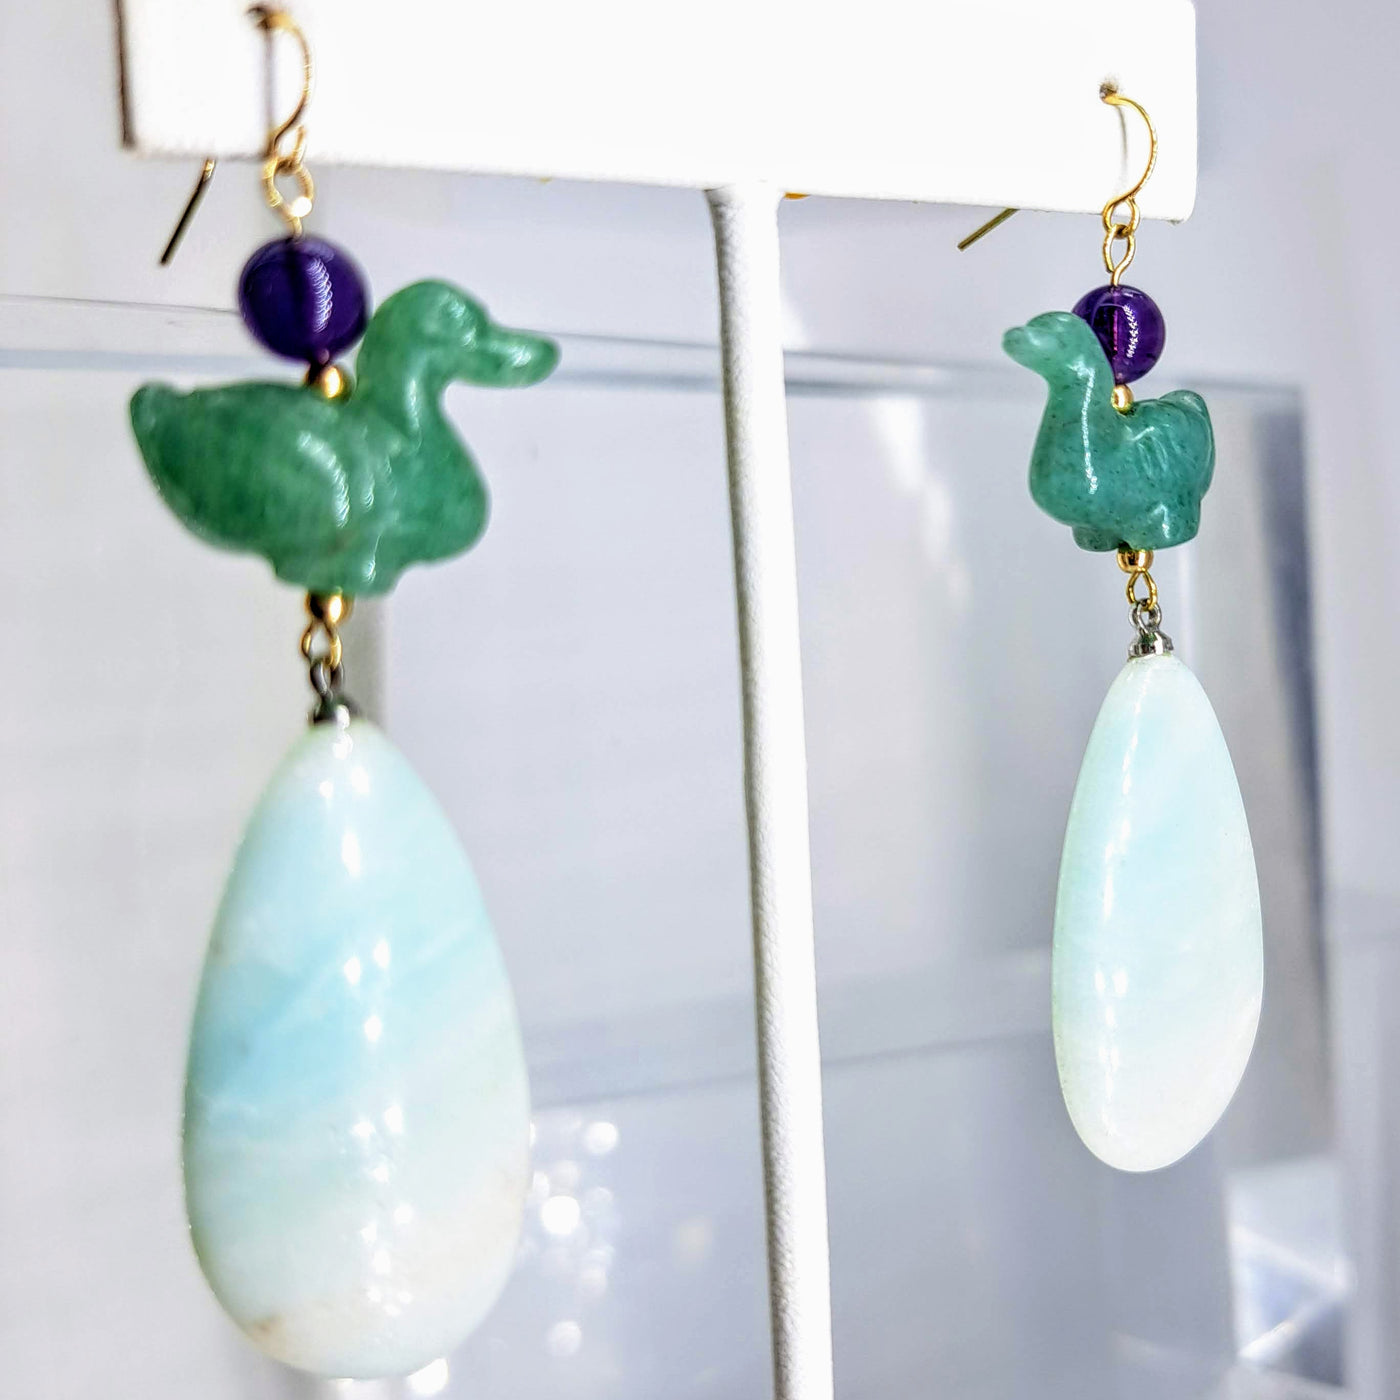 "Lucky Duck" 2.75" Earrings By Barb - Aventurine, Amethyst, Amazonite, 14K Gold, Sterling Accents